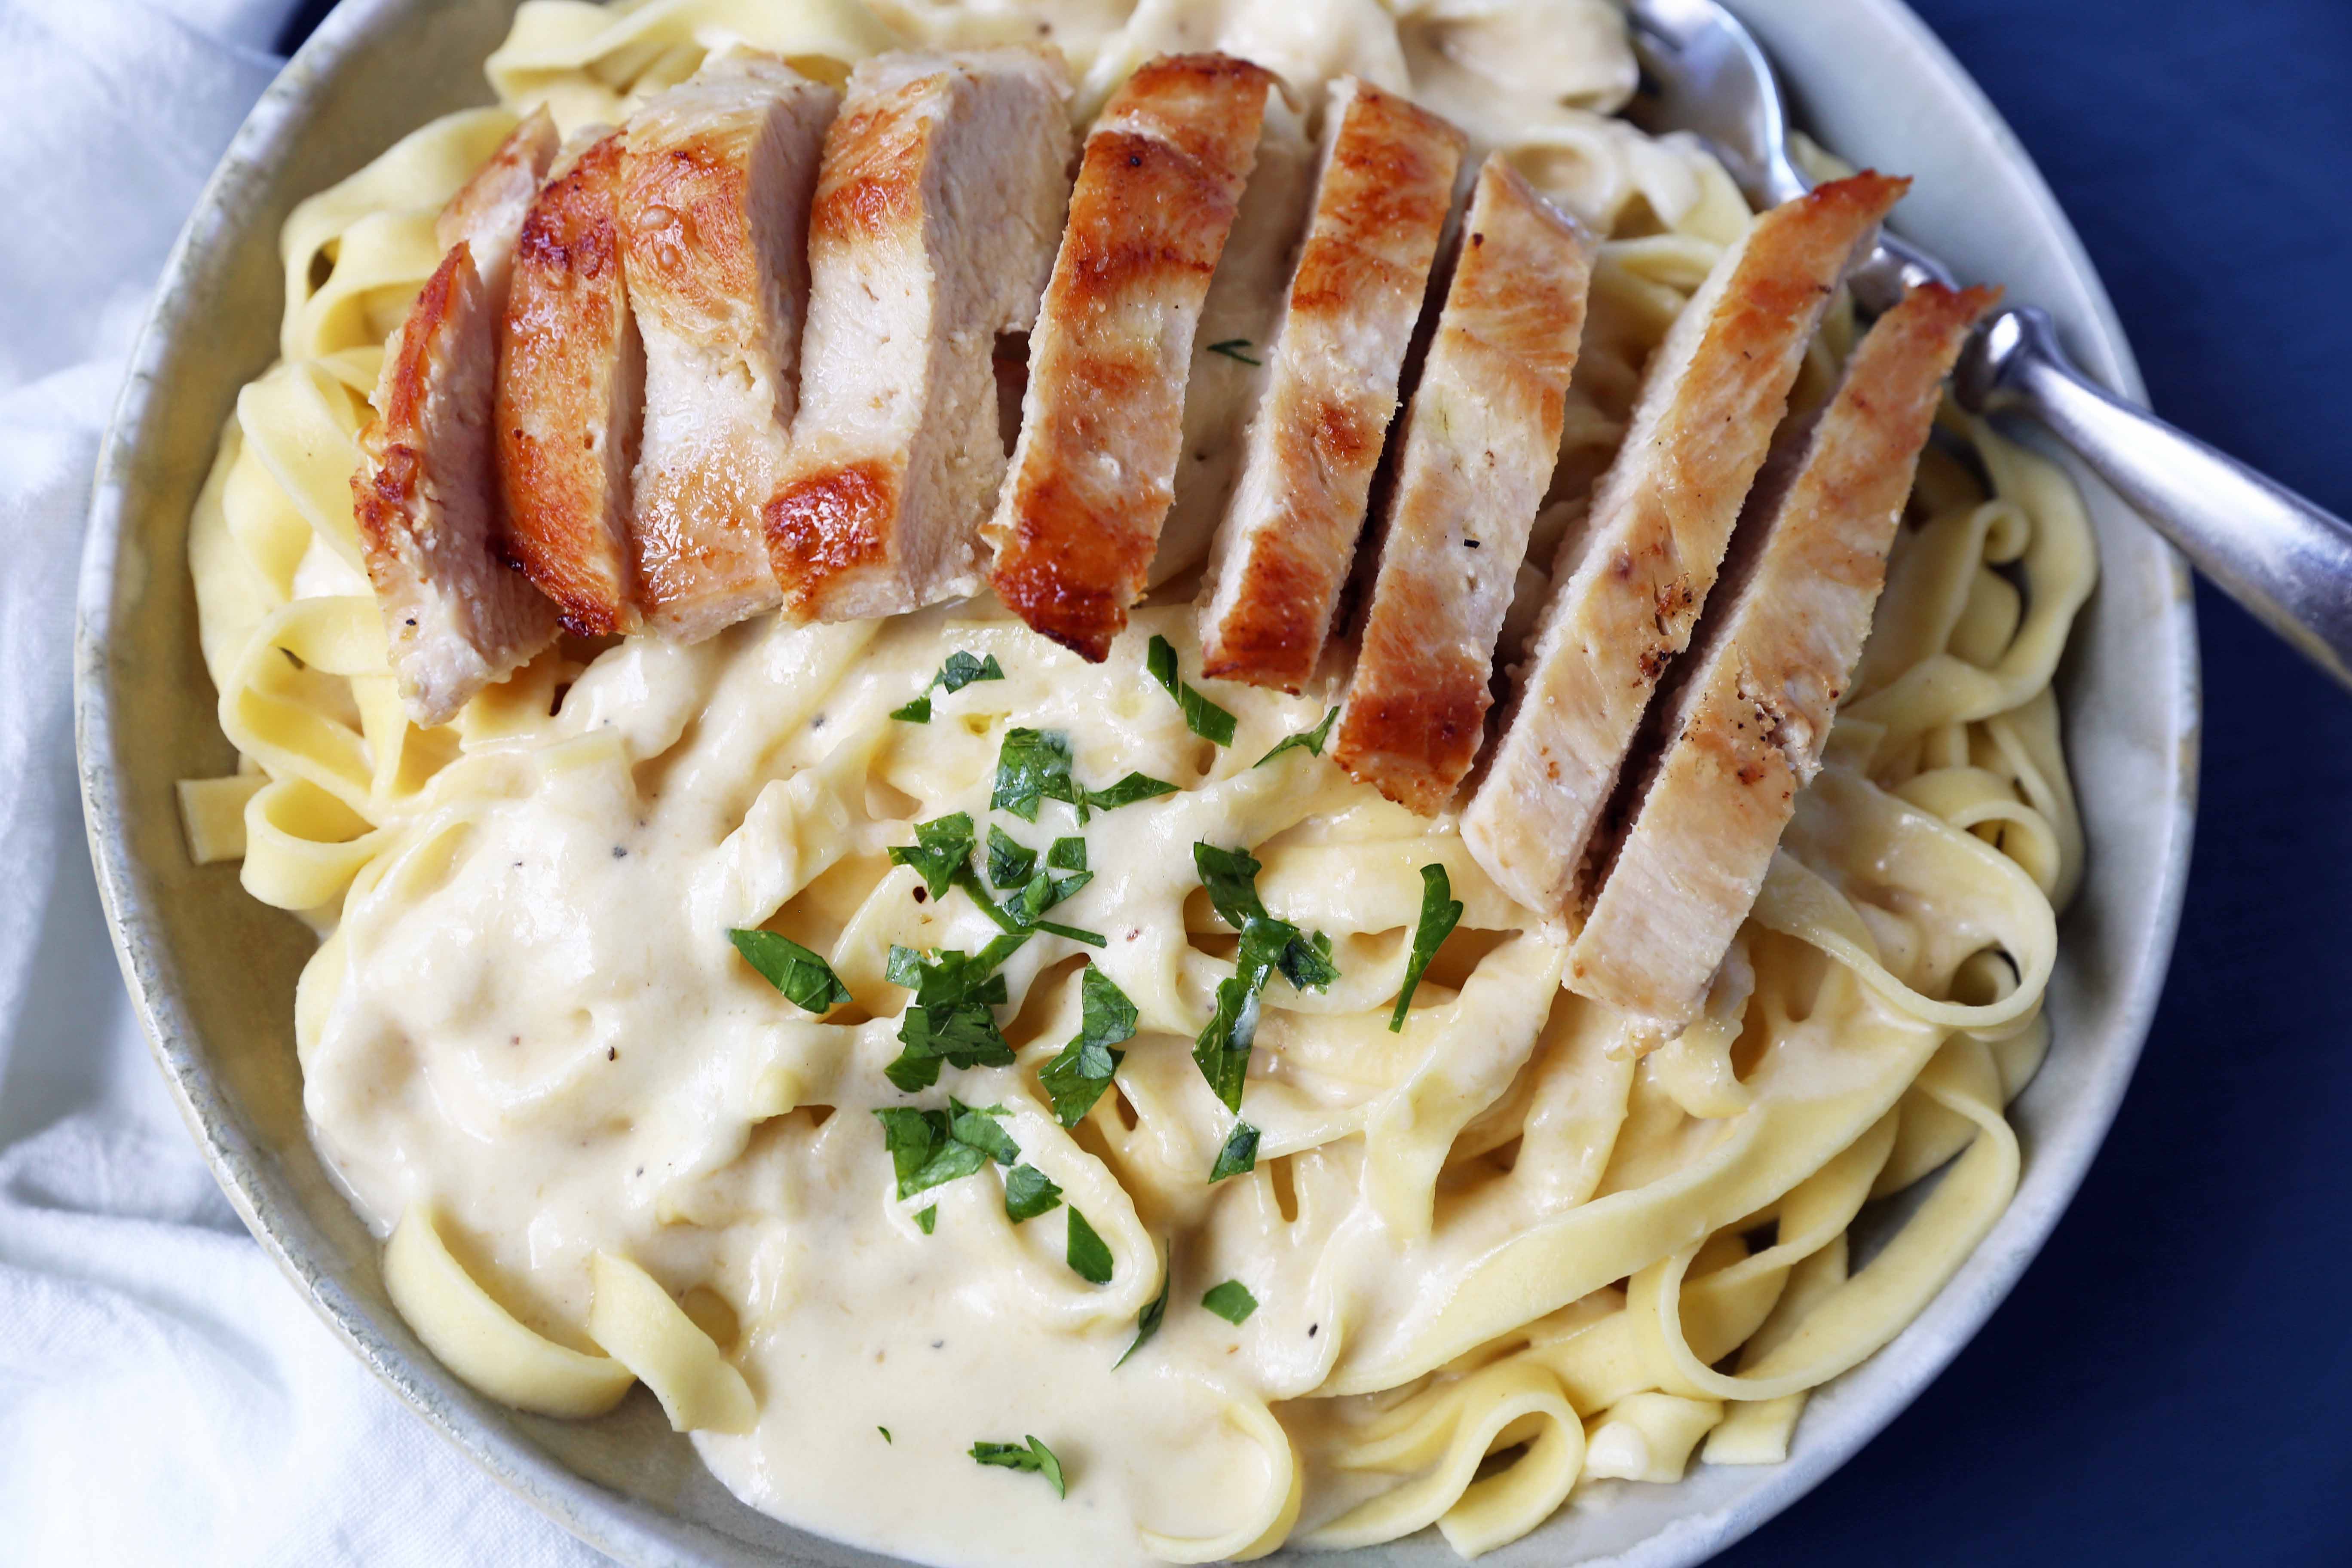 Chicken Fettucine Alfredo. Creamy parmesan cream sauce tossed with fettuccine pasta and topped with sauteed chicken. How to make the best chicken fettuccine alfredo. www.modernhoney.com #fettuccinealfredo #chickenfettuccinealfredo #pasta